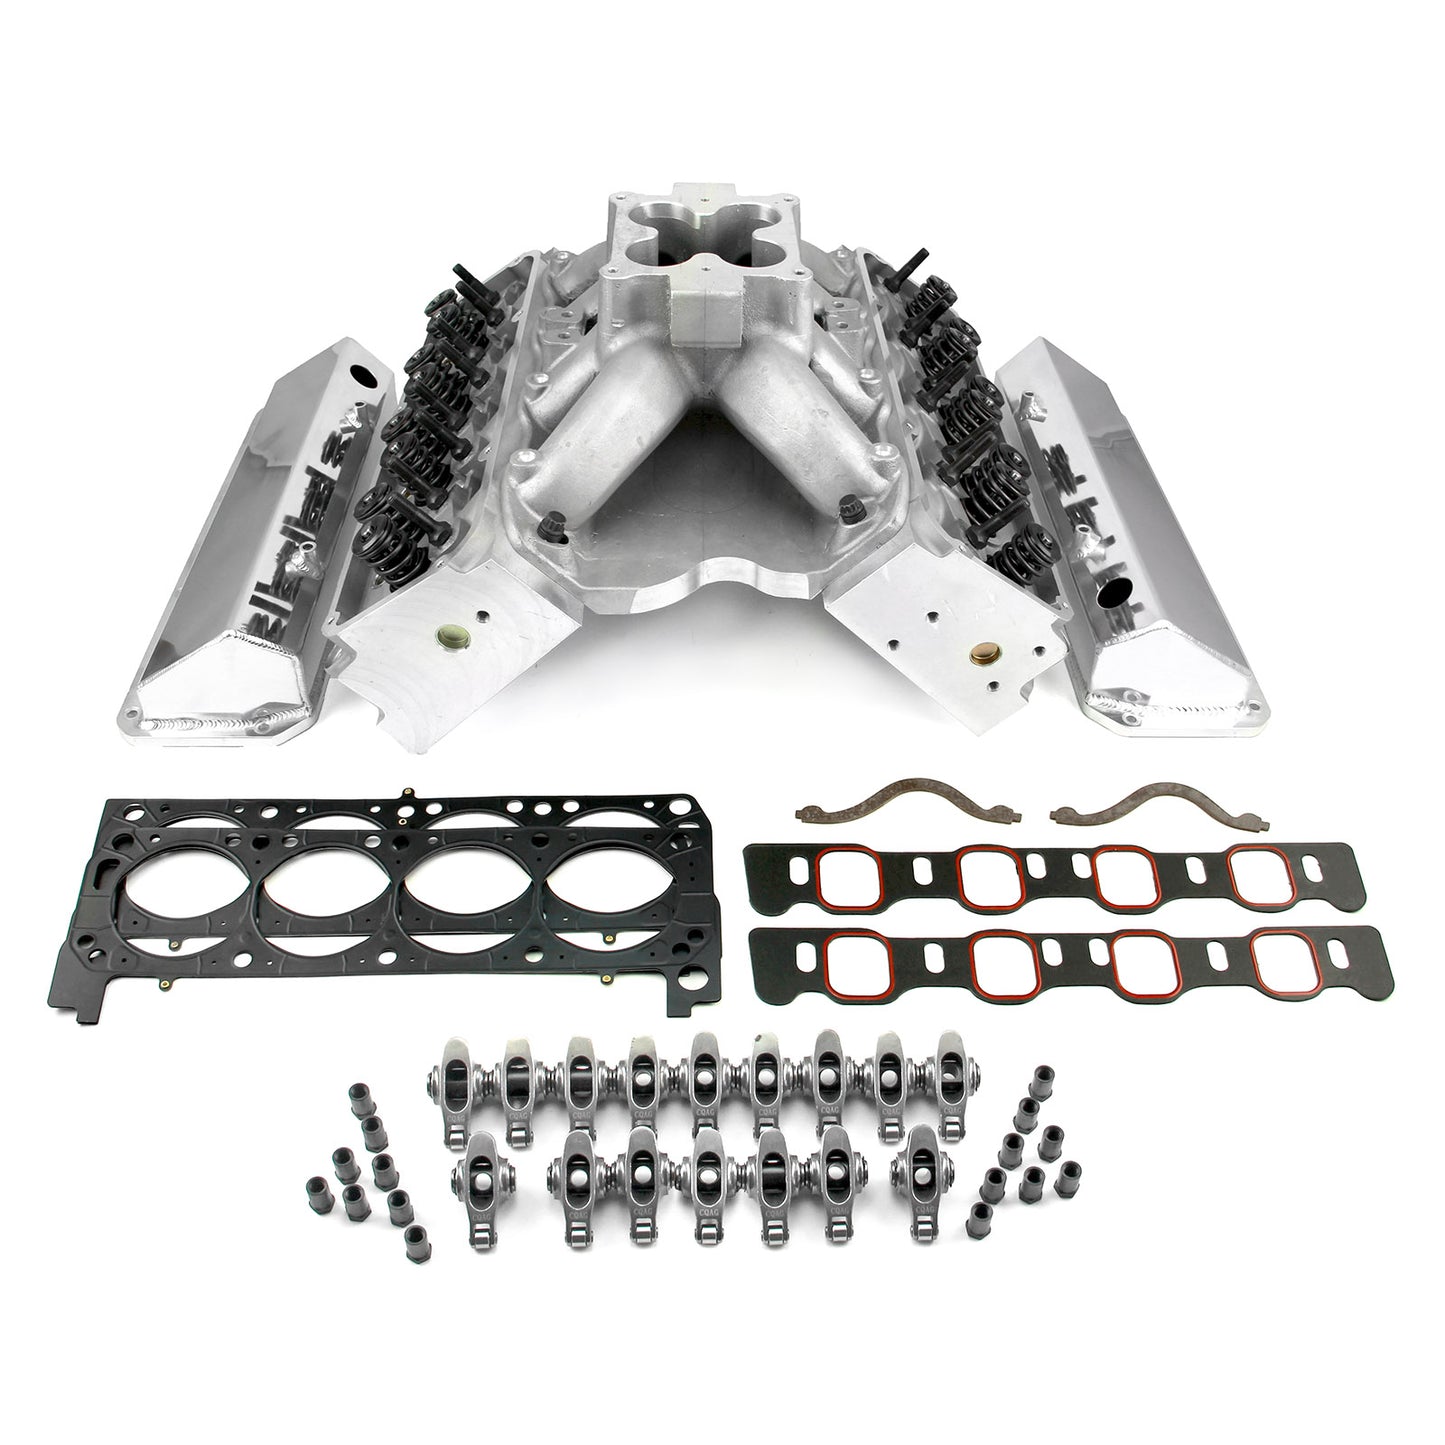 Speedmaster PCE435.1057 Fits Ford 351W 9.5 Deck Fusion Manifold Hyd FT Cylinder Head Top End Engine Combo Kit